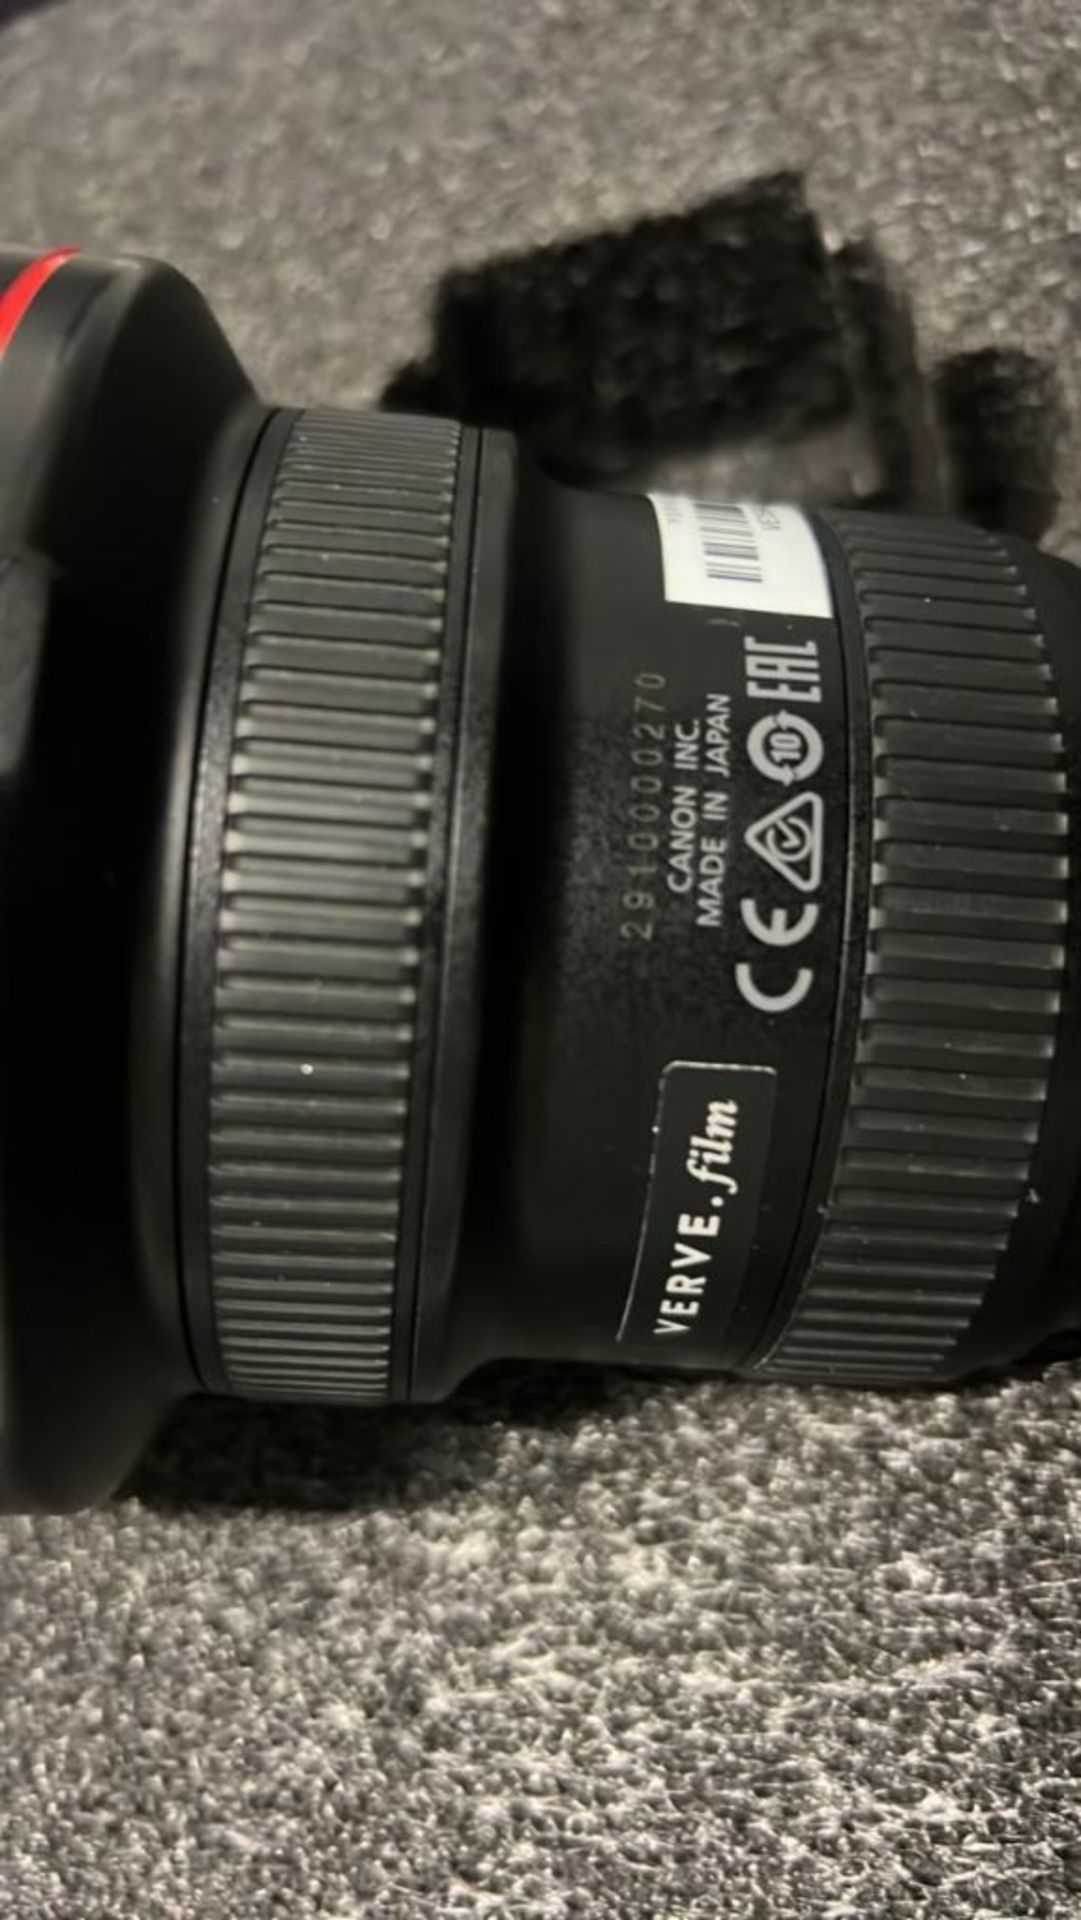 Canon EF 11-24mm f/4L USM Lens with PeliCase SN: 2910000270 - Image 2 of 5